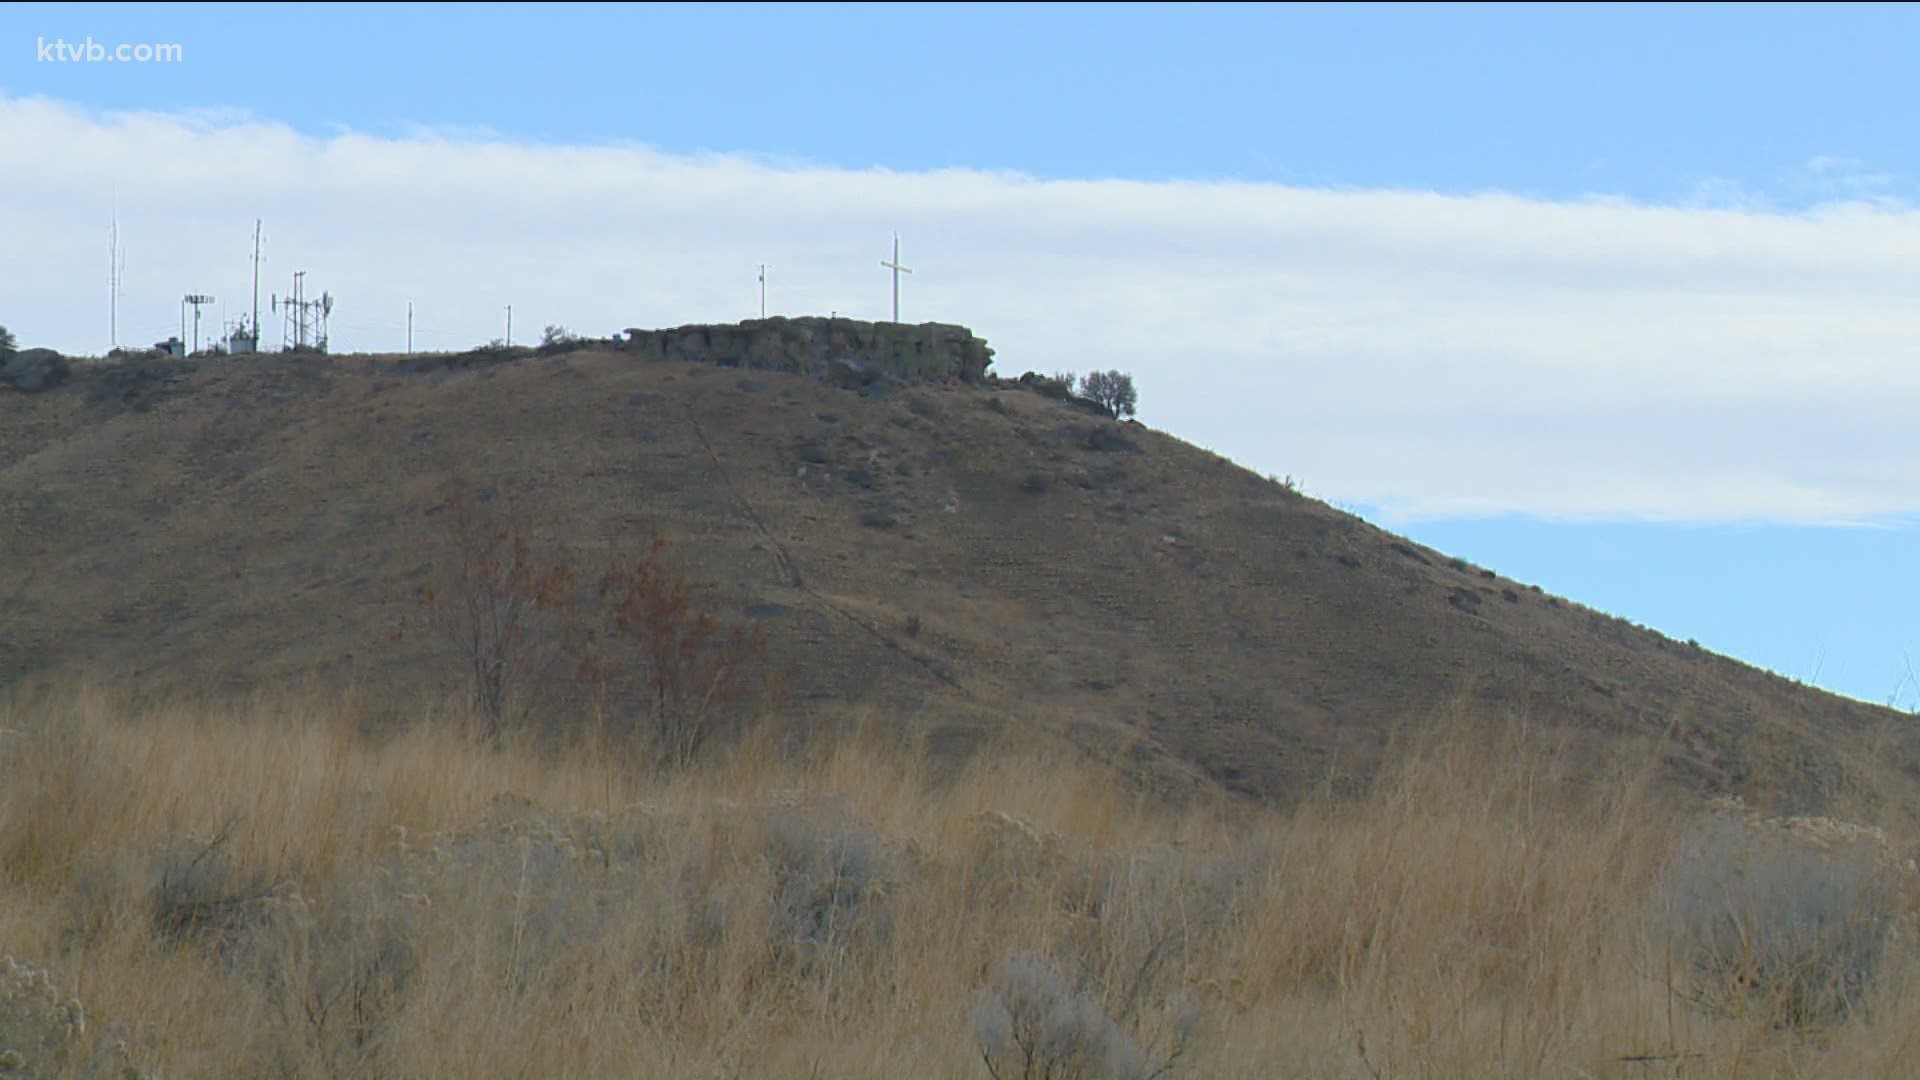 New Gate Will Allow Limited Access To Table Rock Between Sunrise And Sunset Kens5com